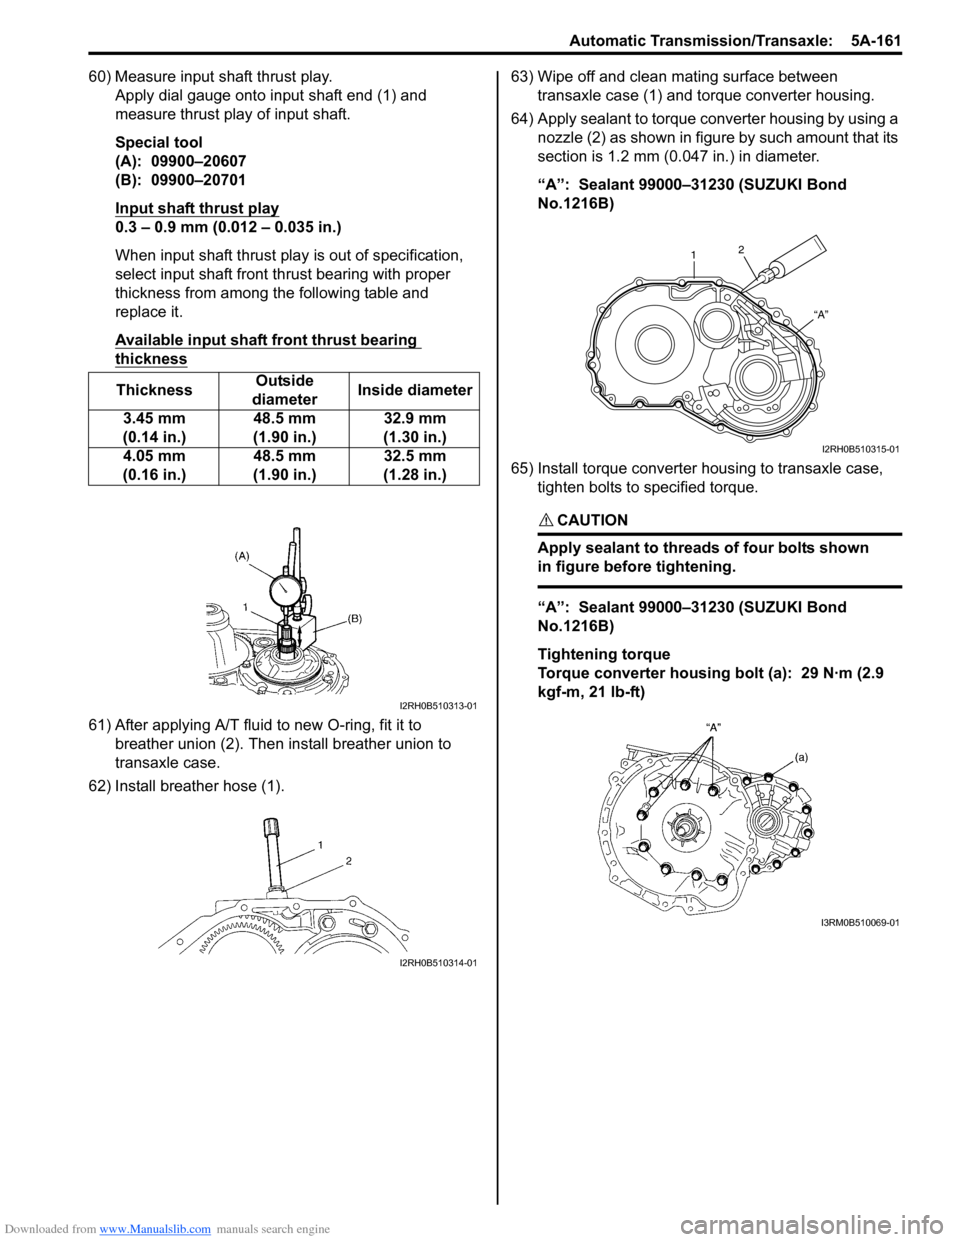 SUZUKI SWIFT 2007 2.G Service Workshop Manual Downloaded from www.Manualslib.com manuals search engine Automatic Transmission/Transaxle:  5A-161
60) Measure input shaft thrust play.Apply dial gauge onto input shaft end (1) and 
measure thrust pla